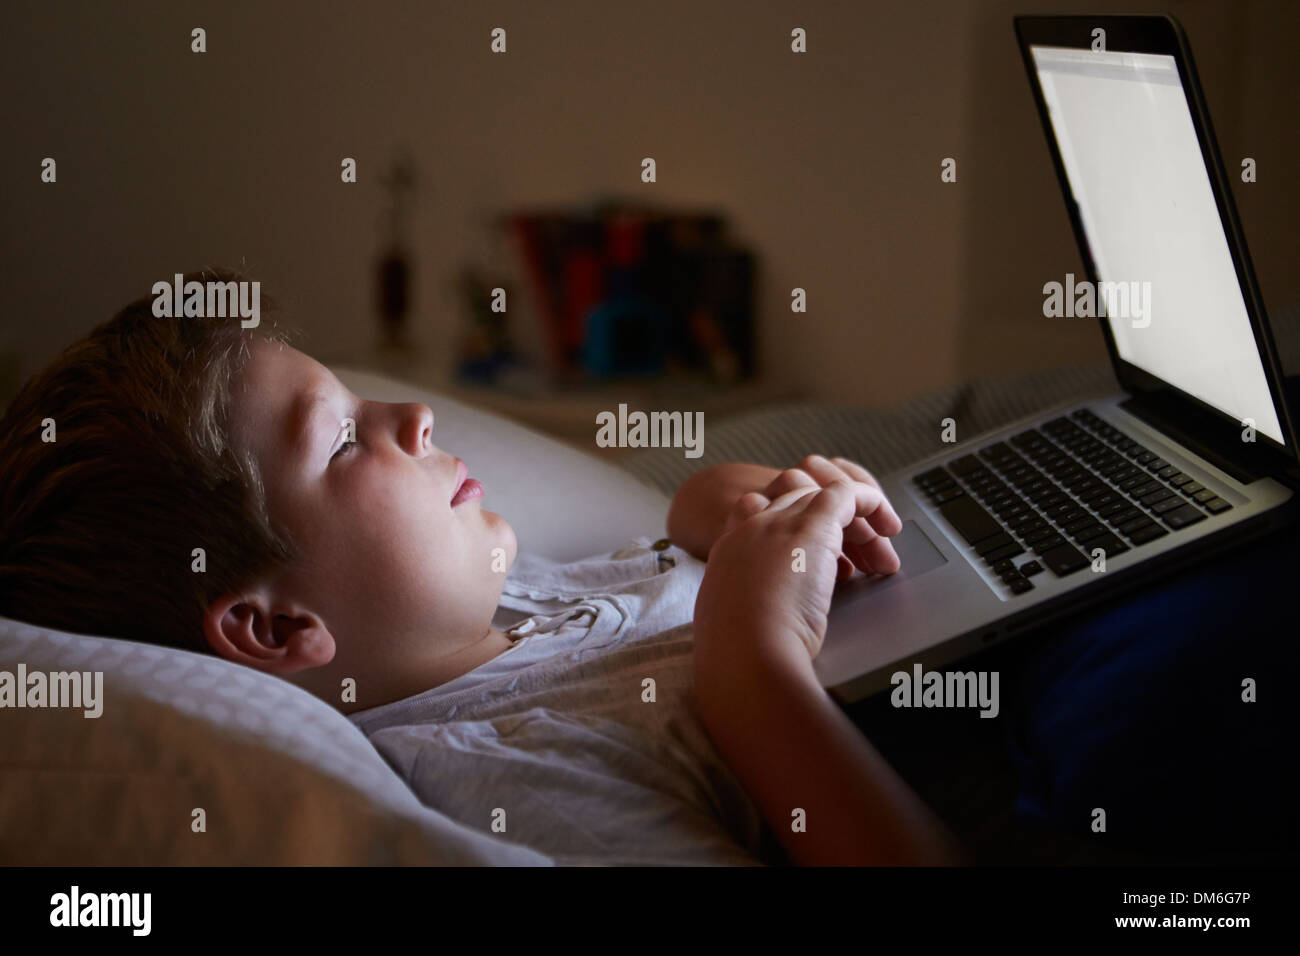 Boy Using Laptop In Bed at Night Banque D'Images